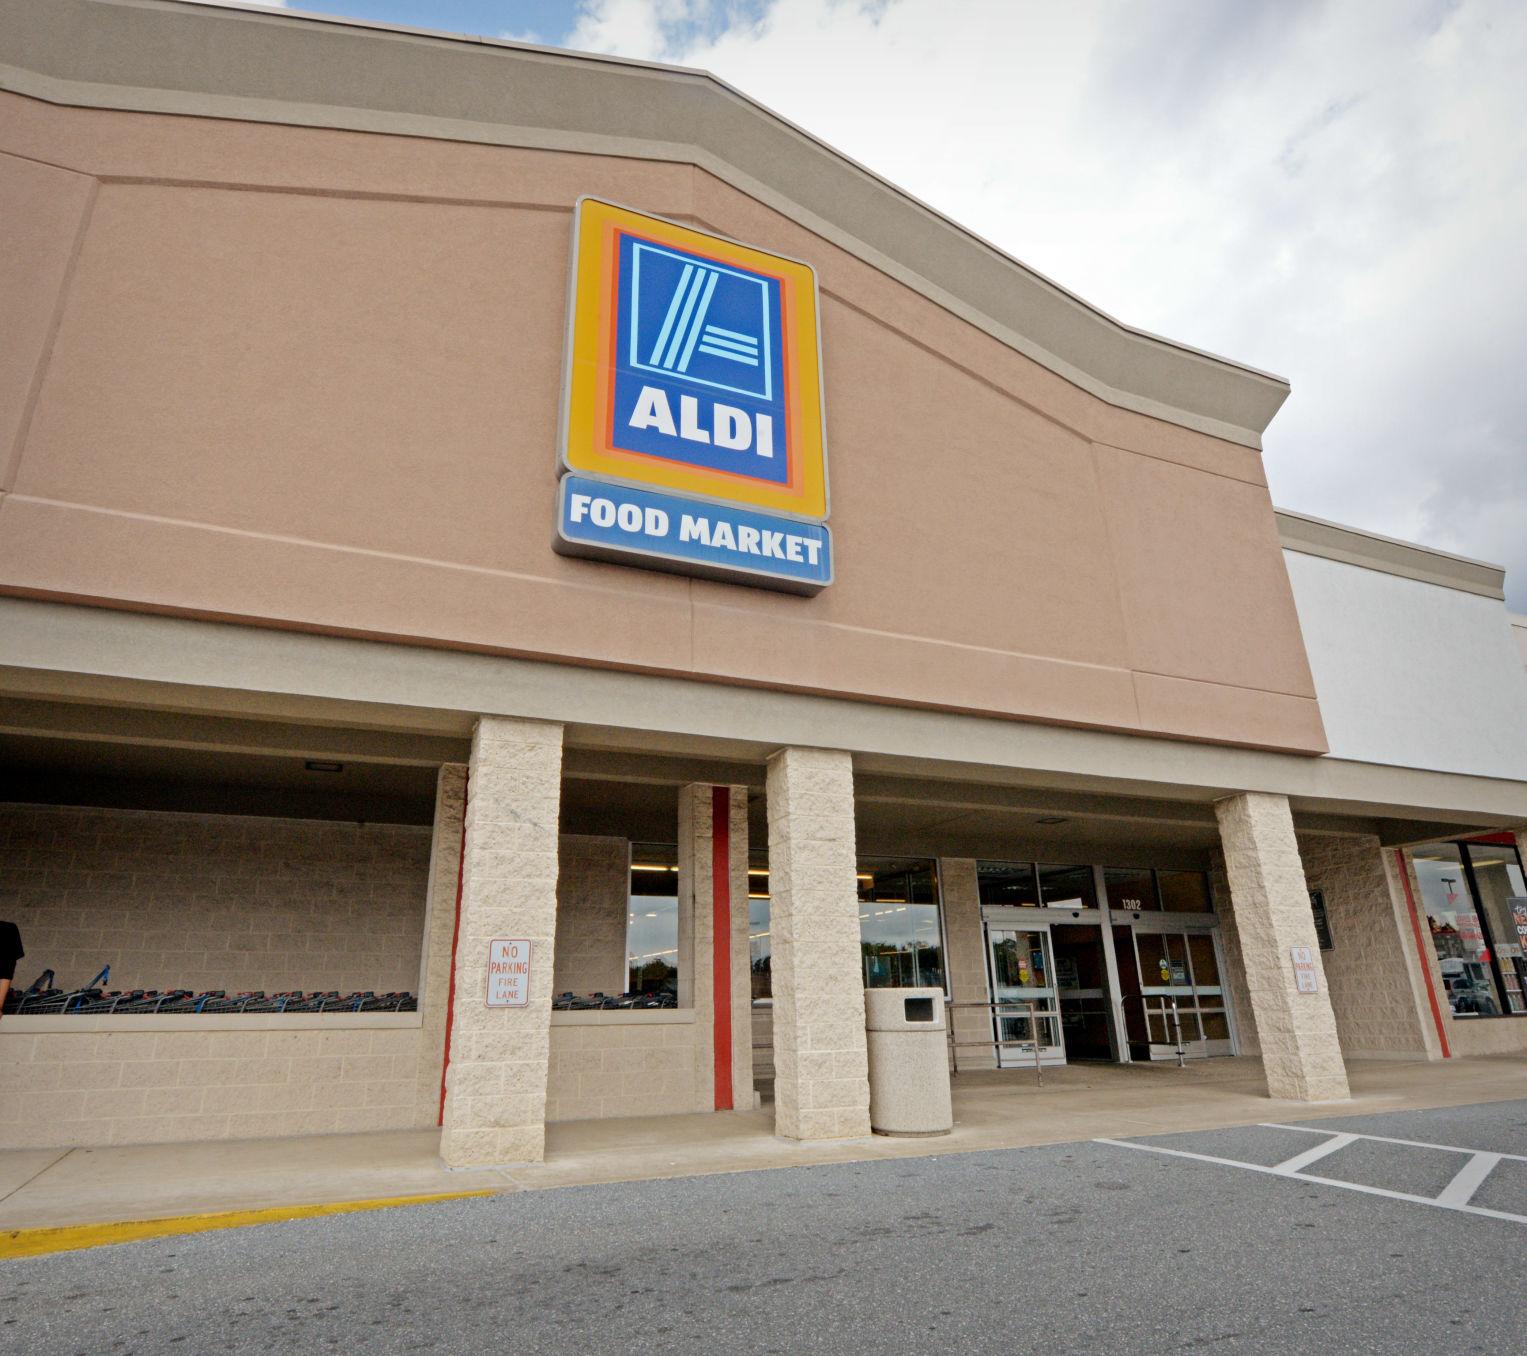 Grocery discounter Aldi opening new stores on Fruitville Pike